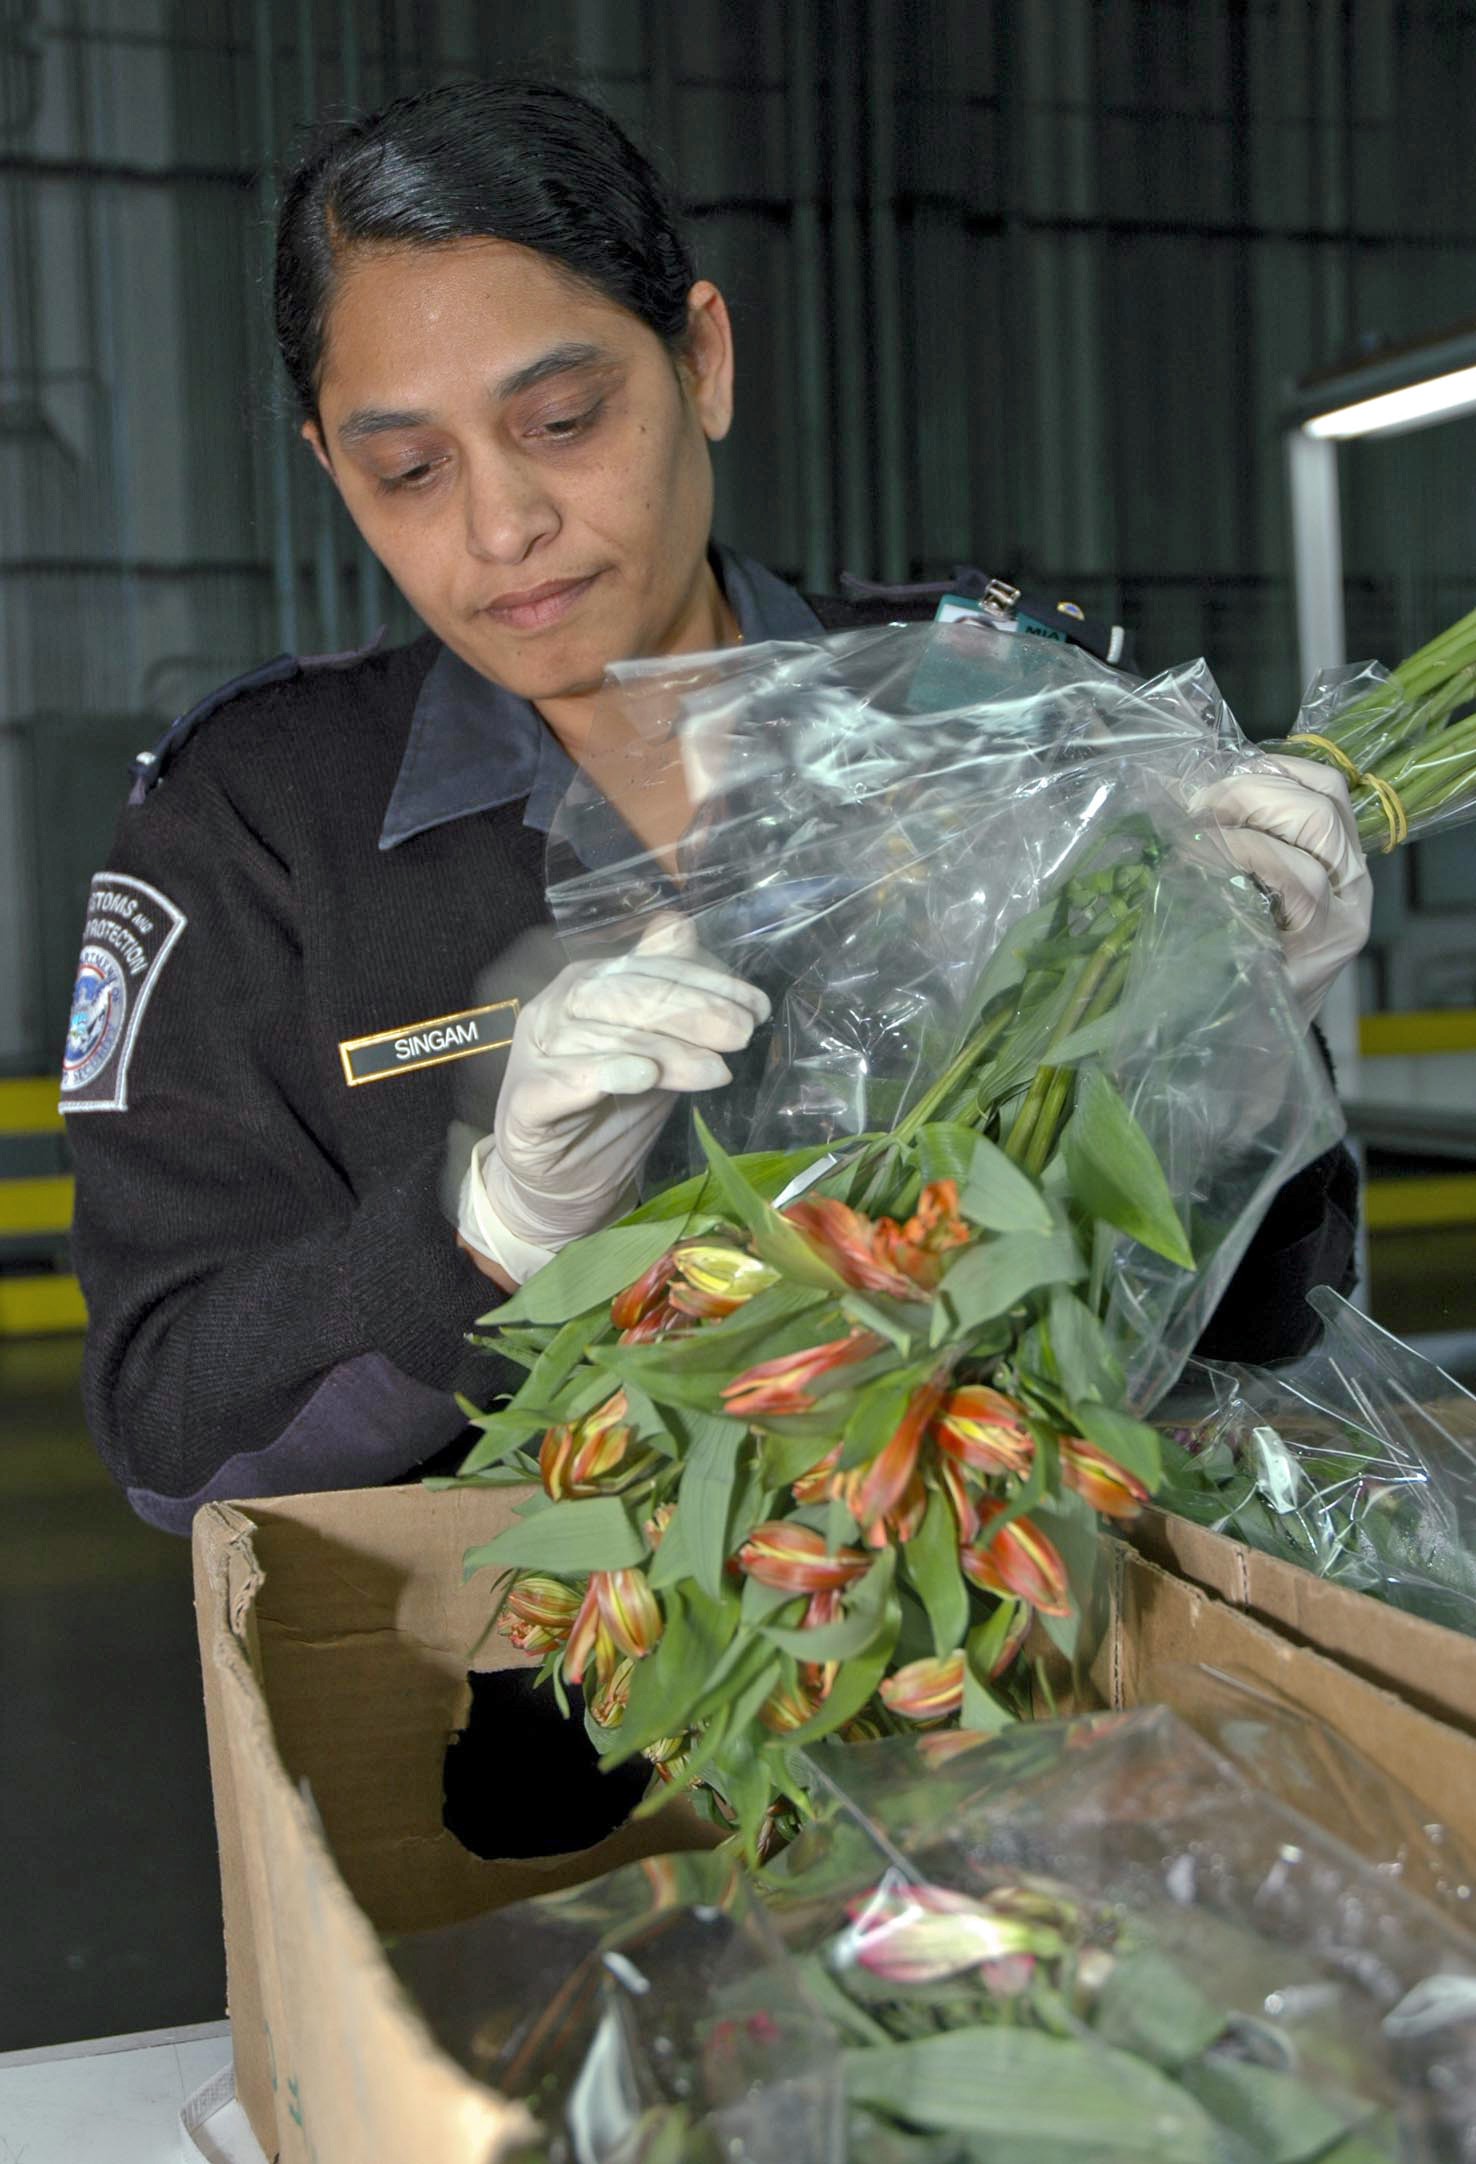 An agriculture specialist at Miami International Airport inspects flowers.